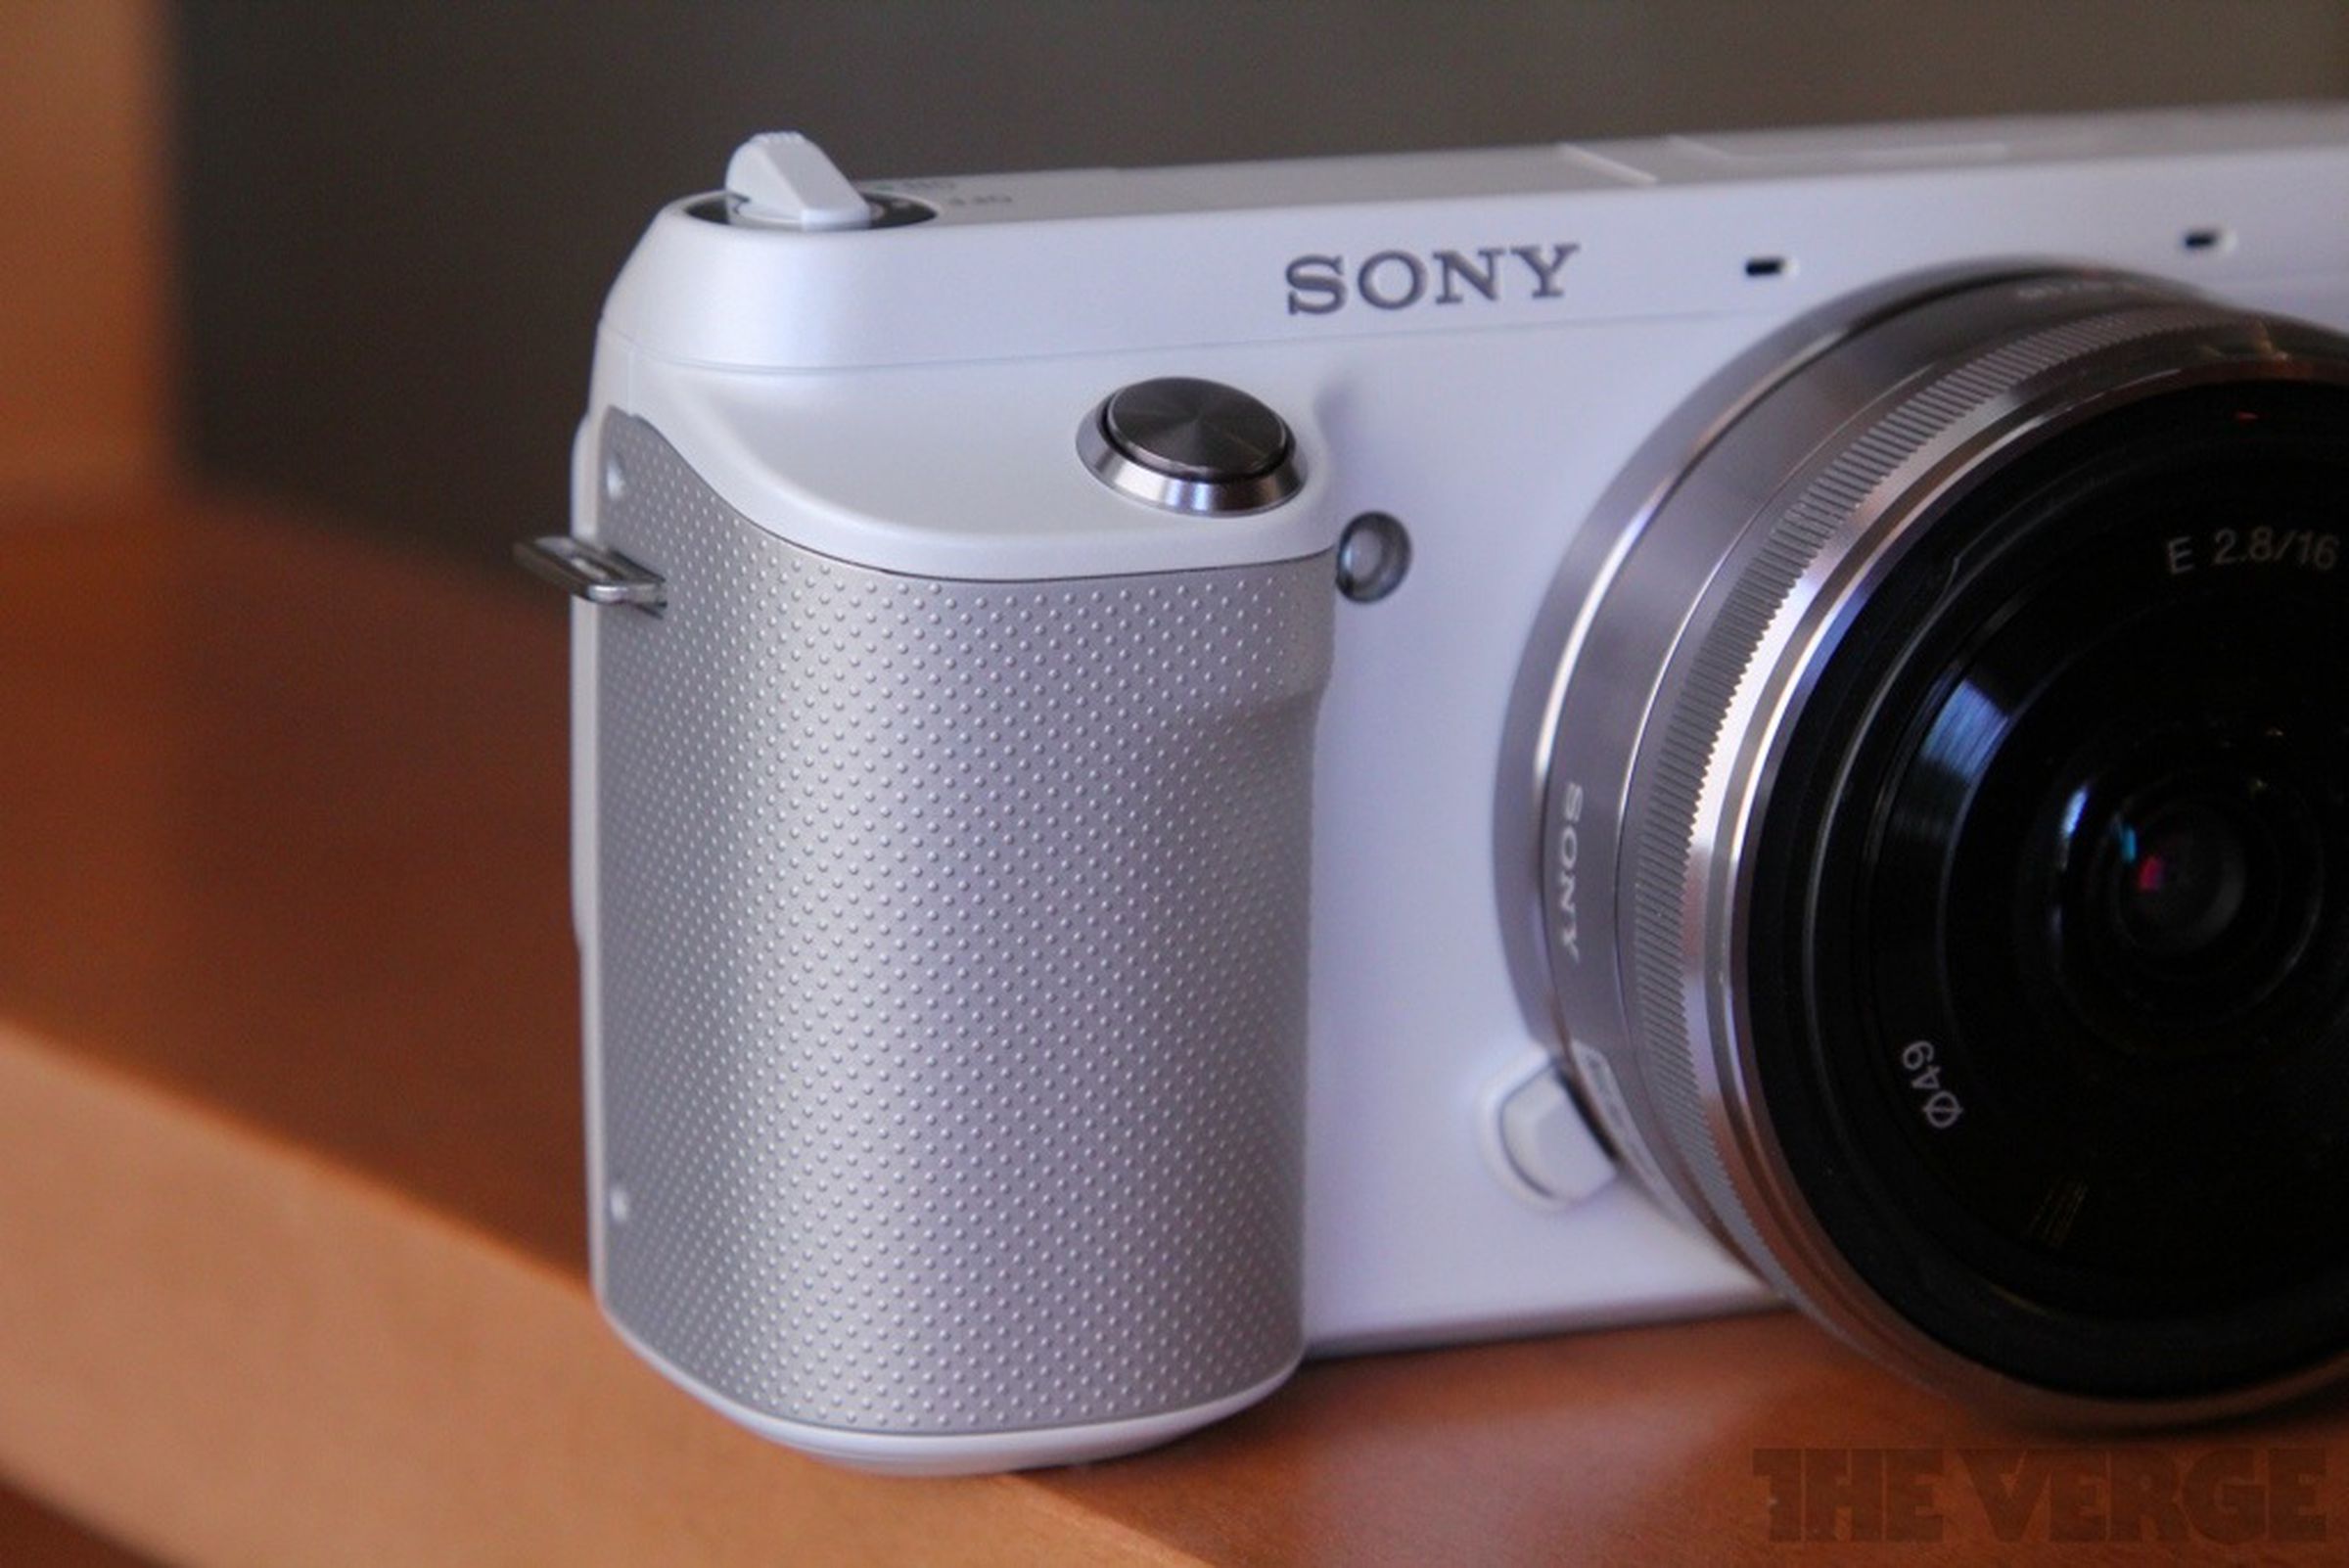 Sony NEX-F3 hands-on pictures